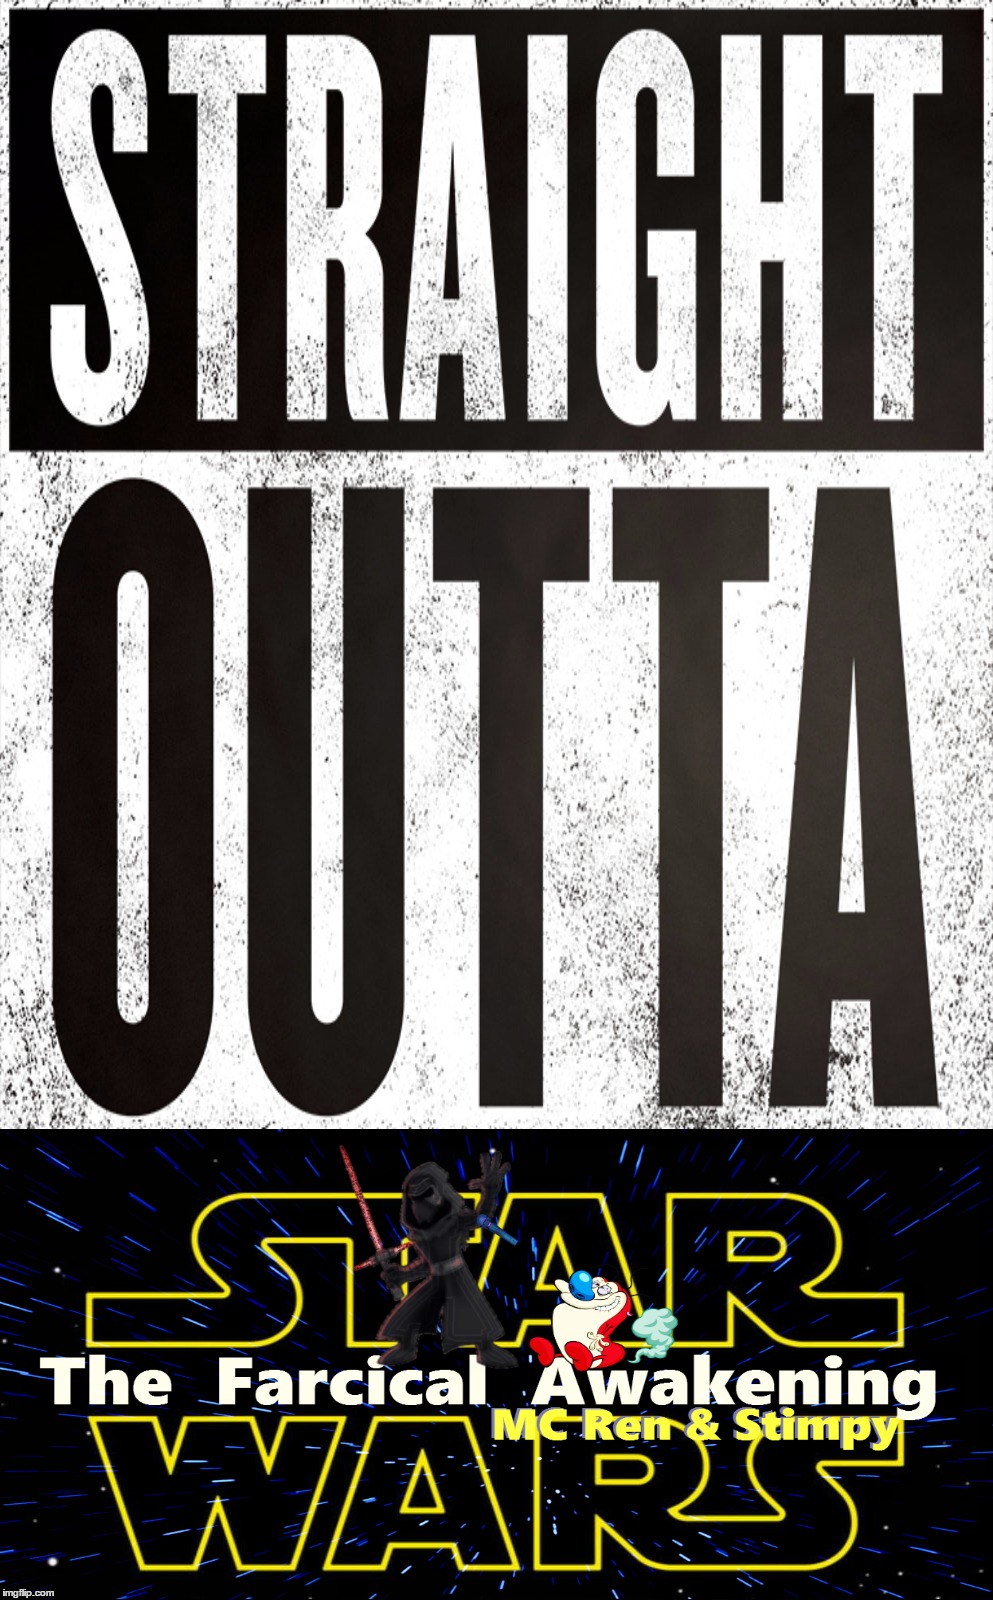 MC Ren & Stimpy #1 | image tagged in straight outta,ren and stimpy,kylo ren,star wars,straight outta compton,the force awakens | made w/ Imgflip meme maker